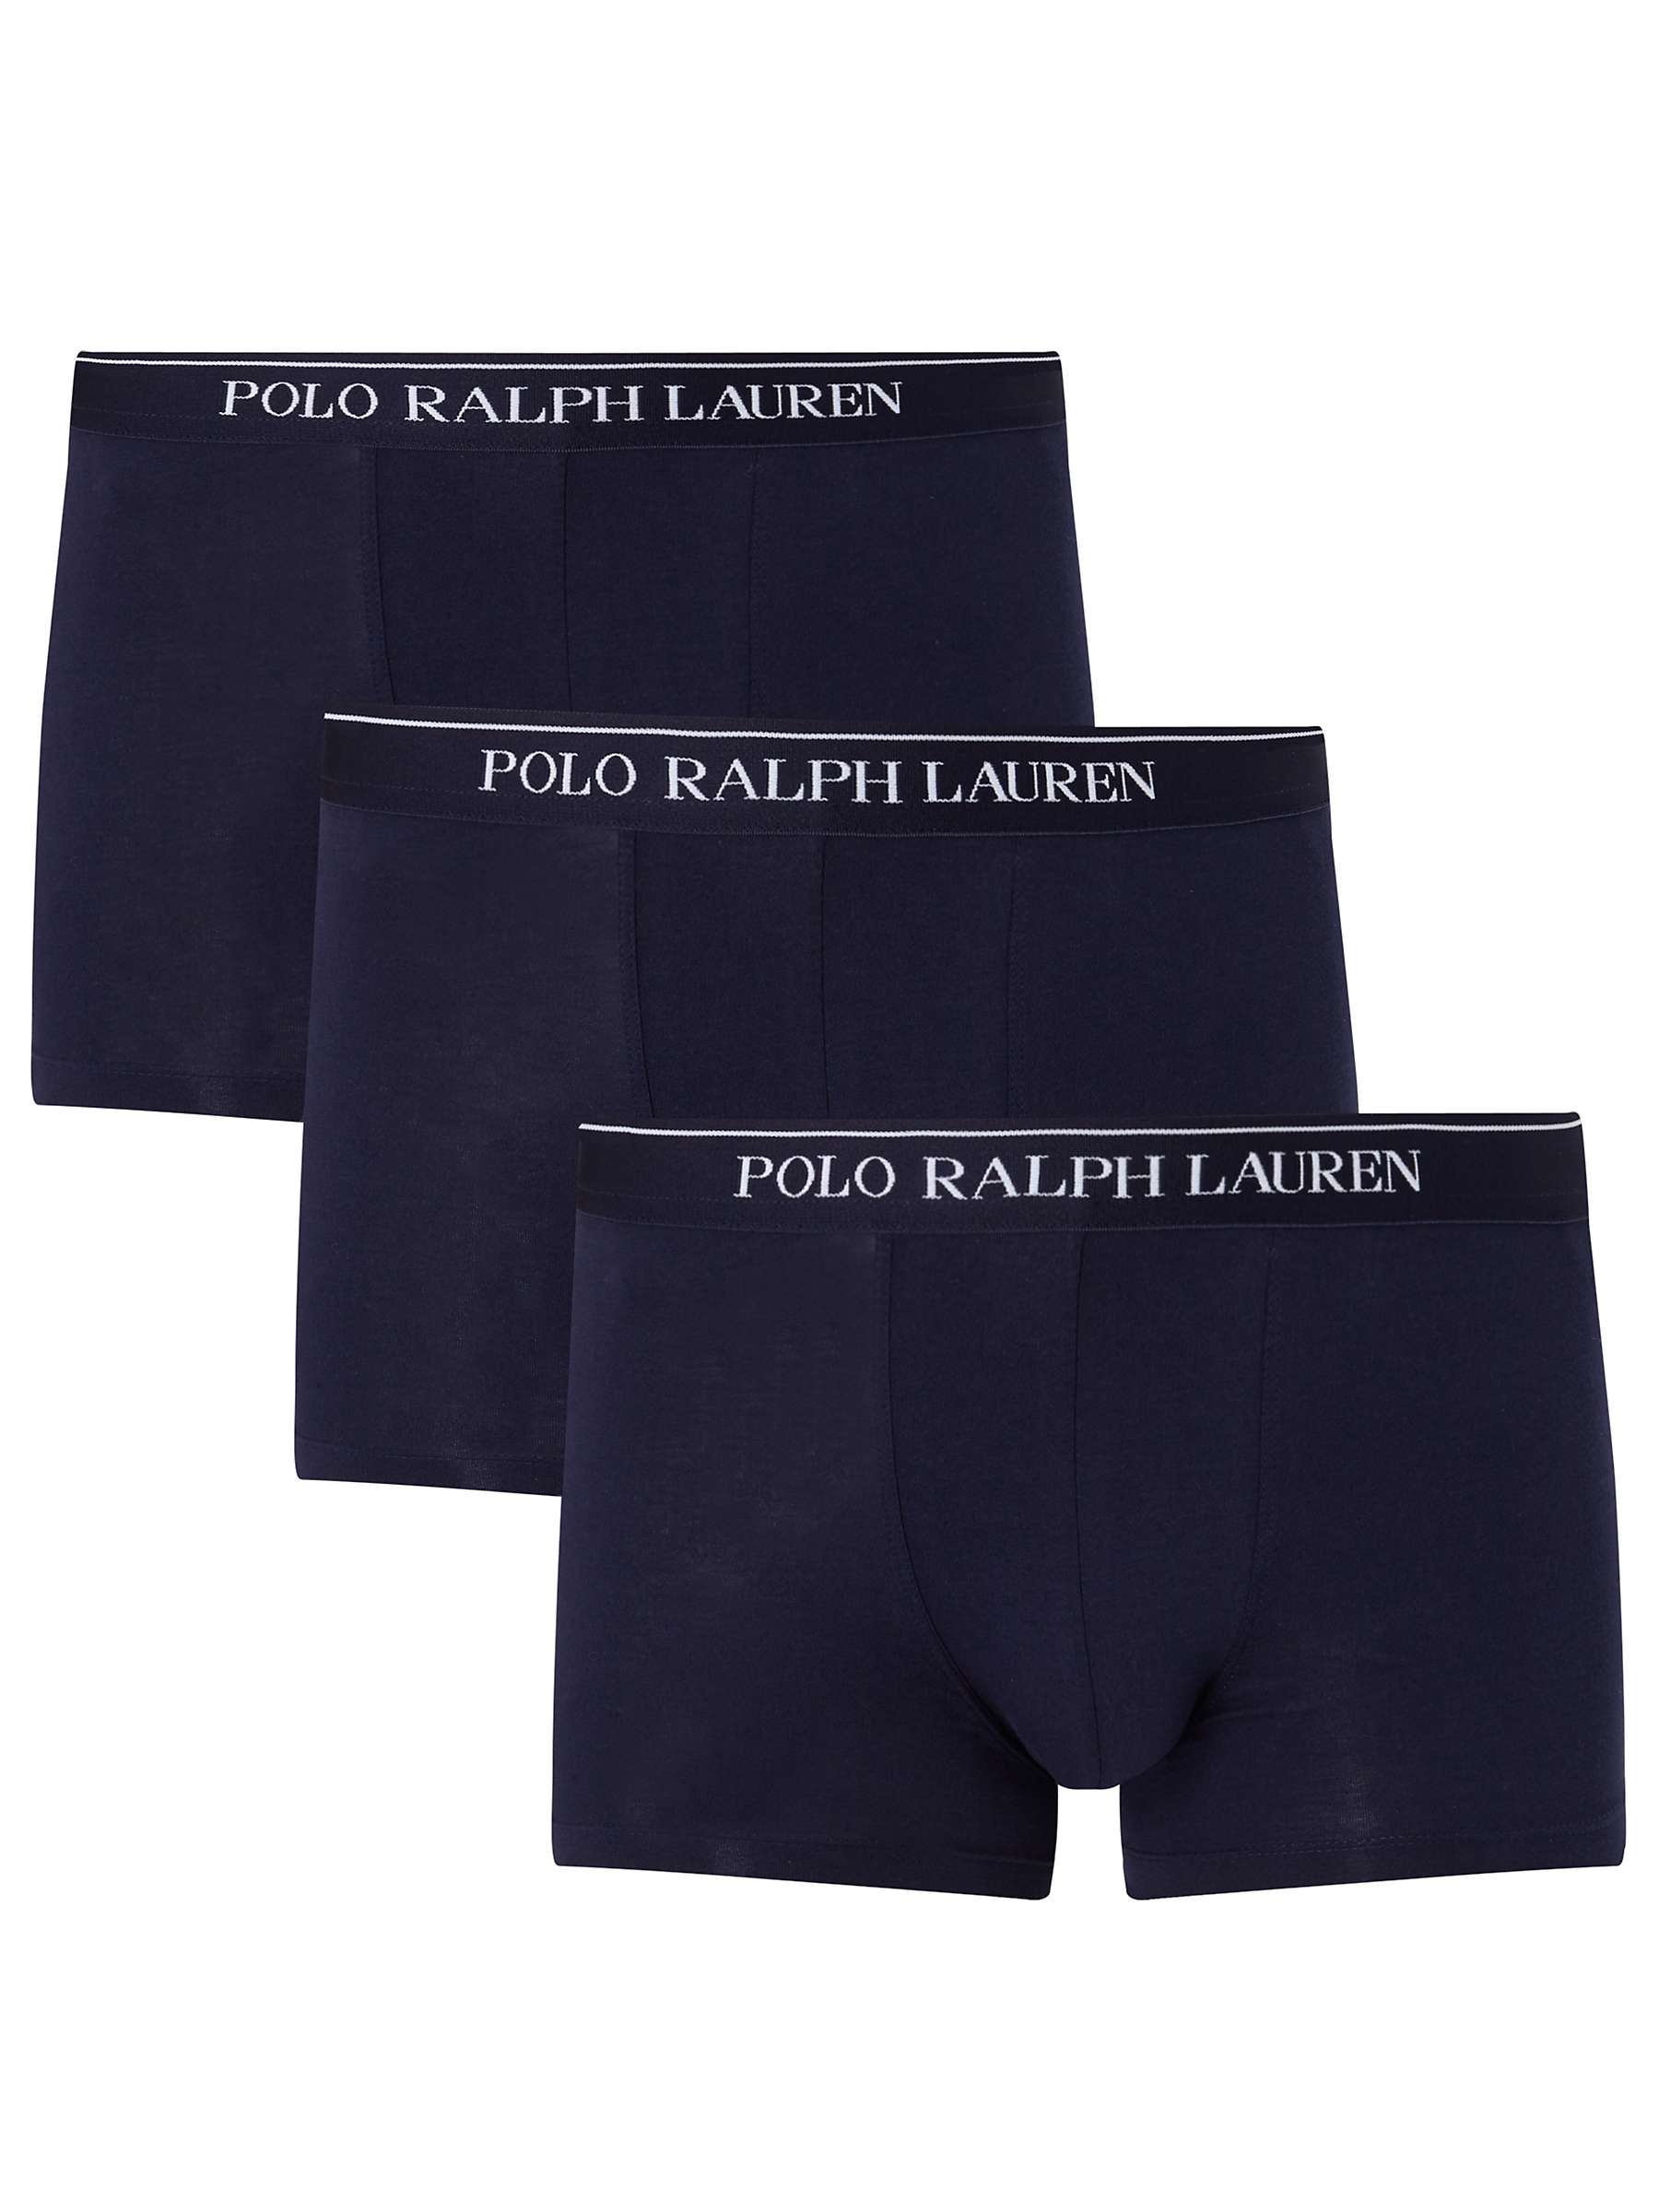 Polo Ralph Lauren Cotton Trunks, Pack of 3, Navy at John Lewis & Partners